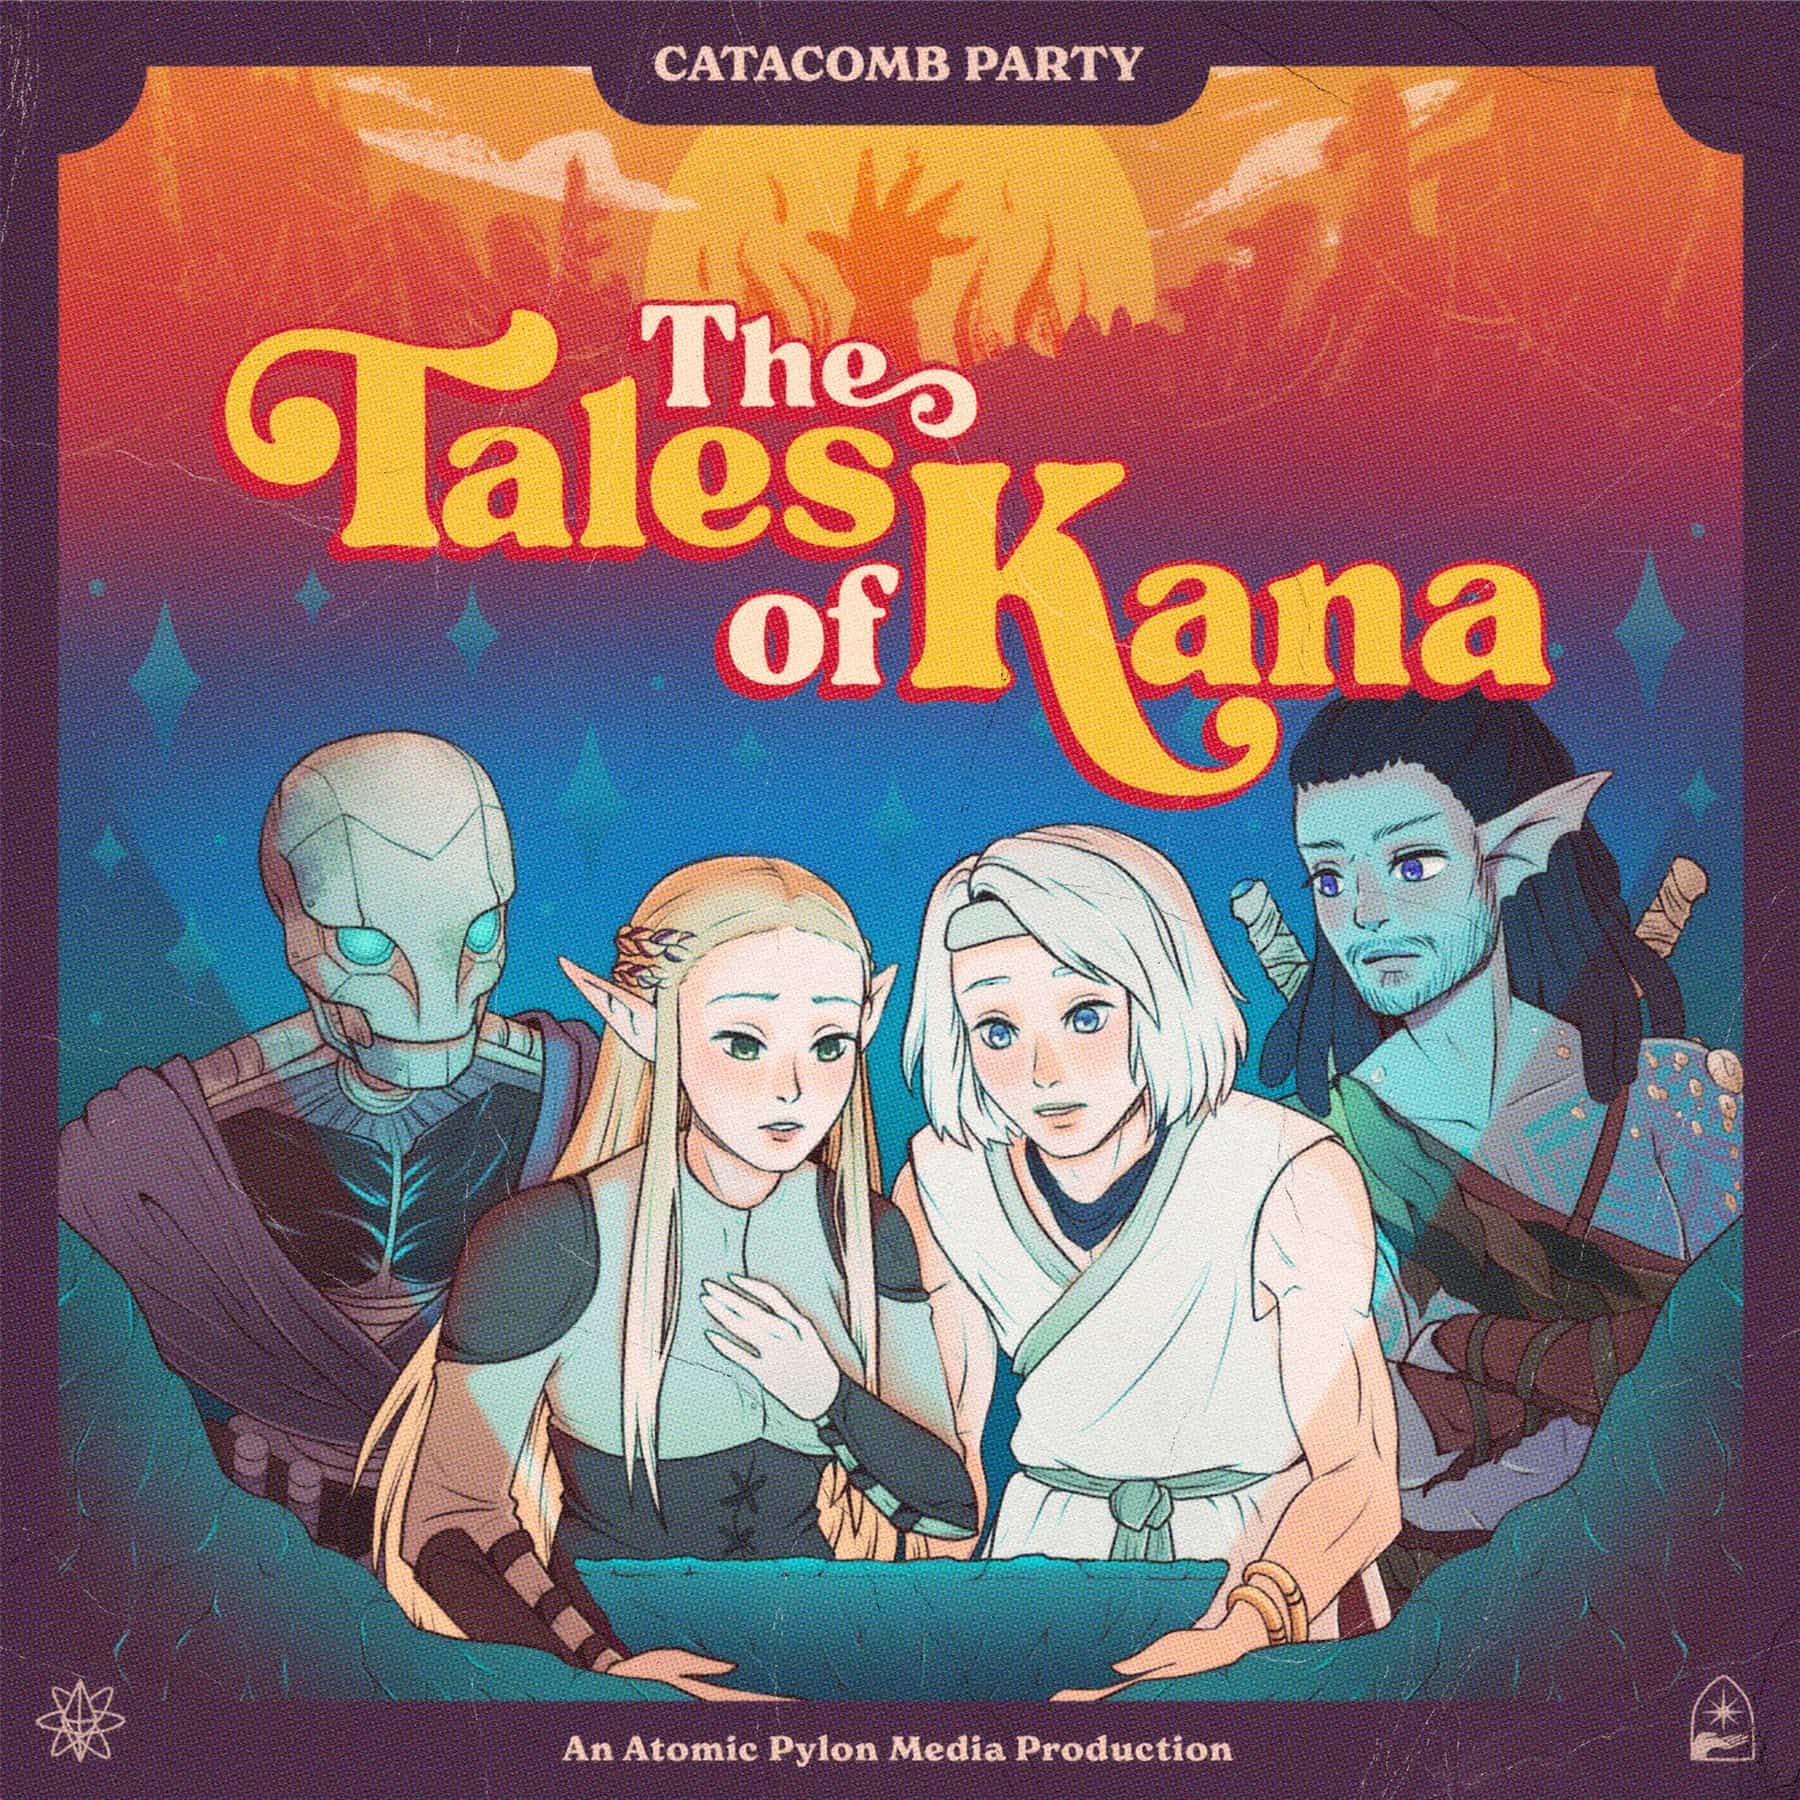 Show artwork for Catacomb Party & The Tales of Kana